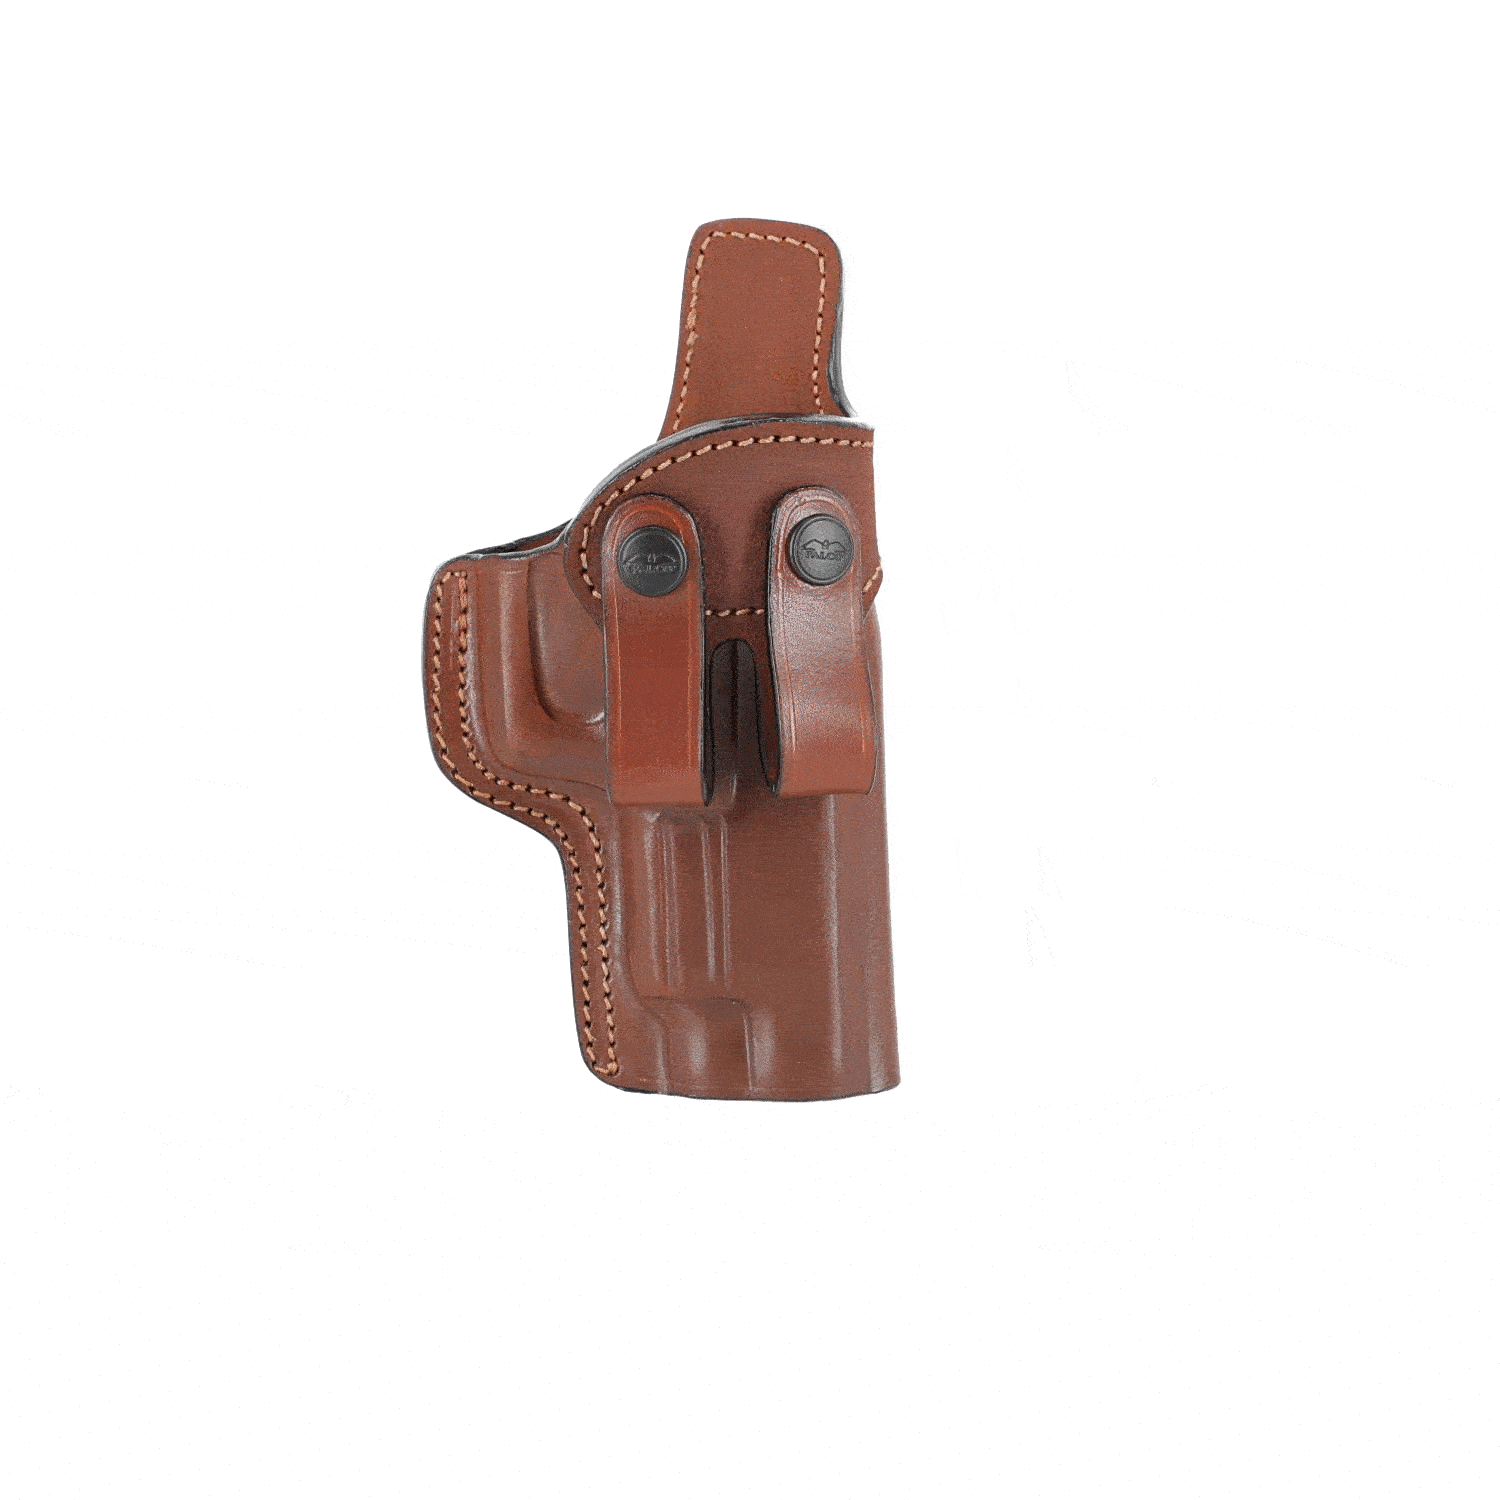 Concealed IWB leather holster